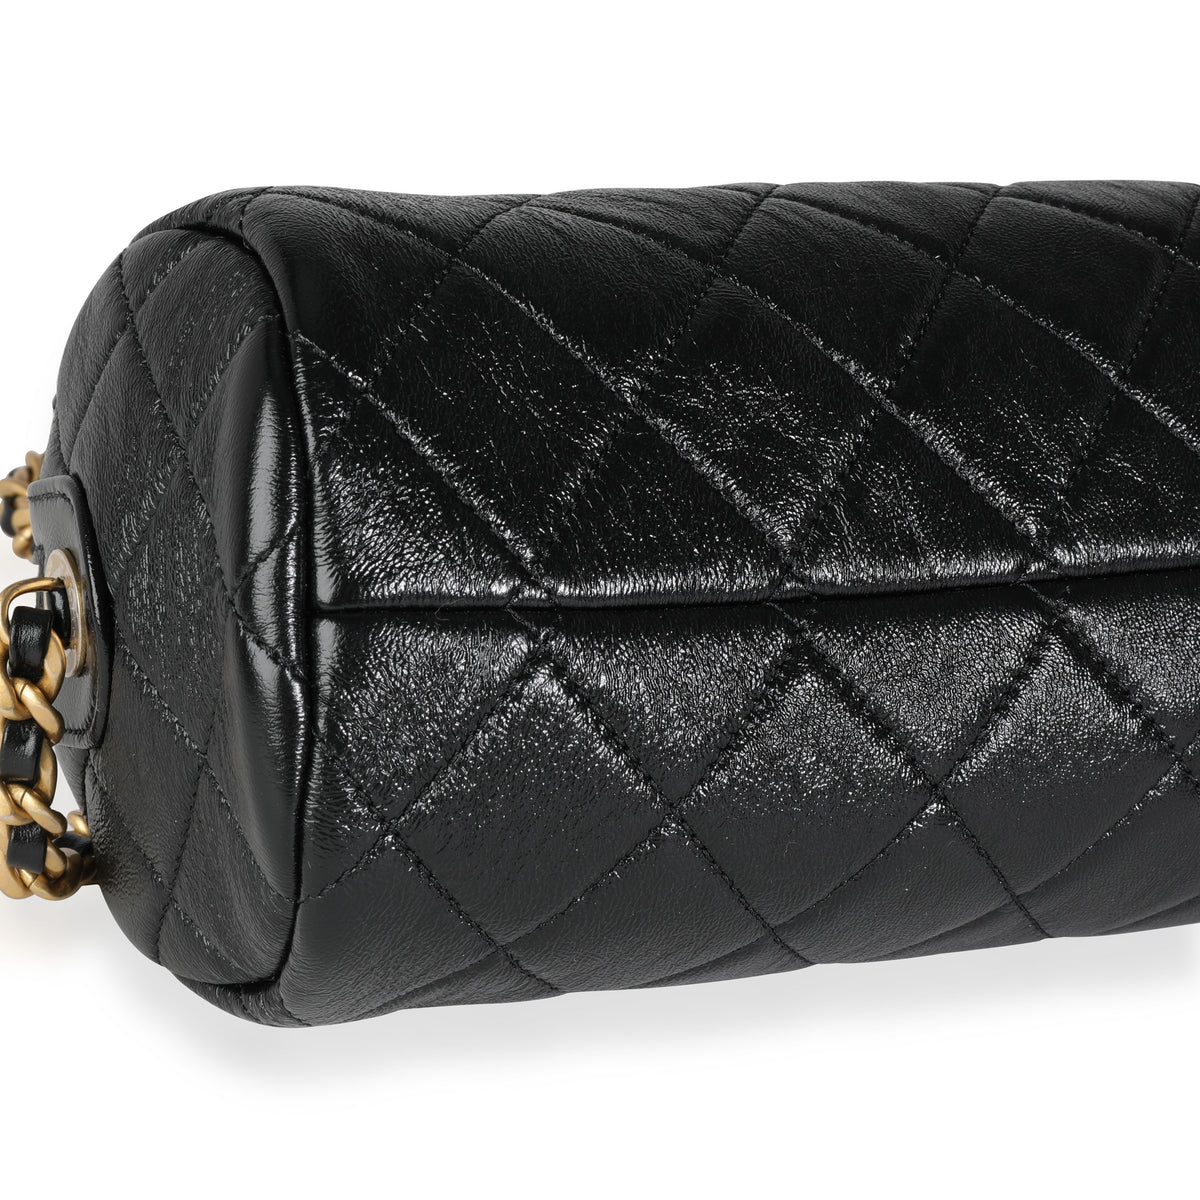 Black Quilted Calfskin Mini Fashion Therapy Bag Gold Hardware, 2020